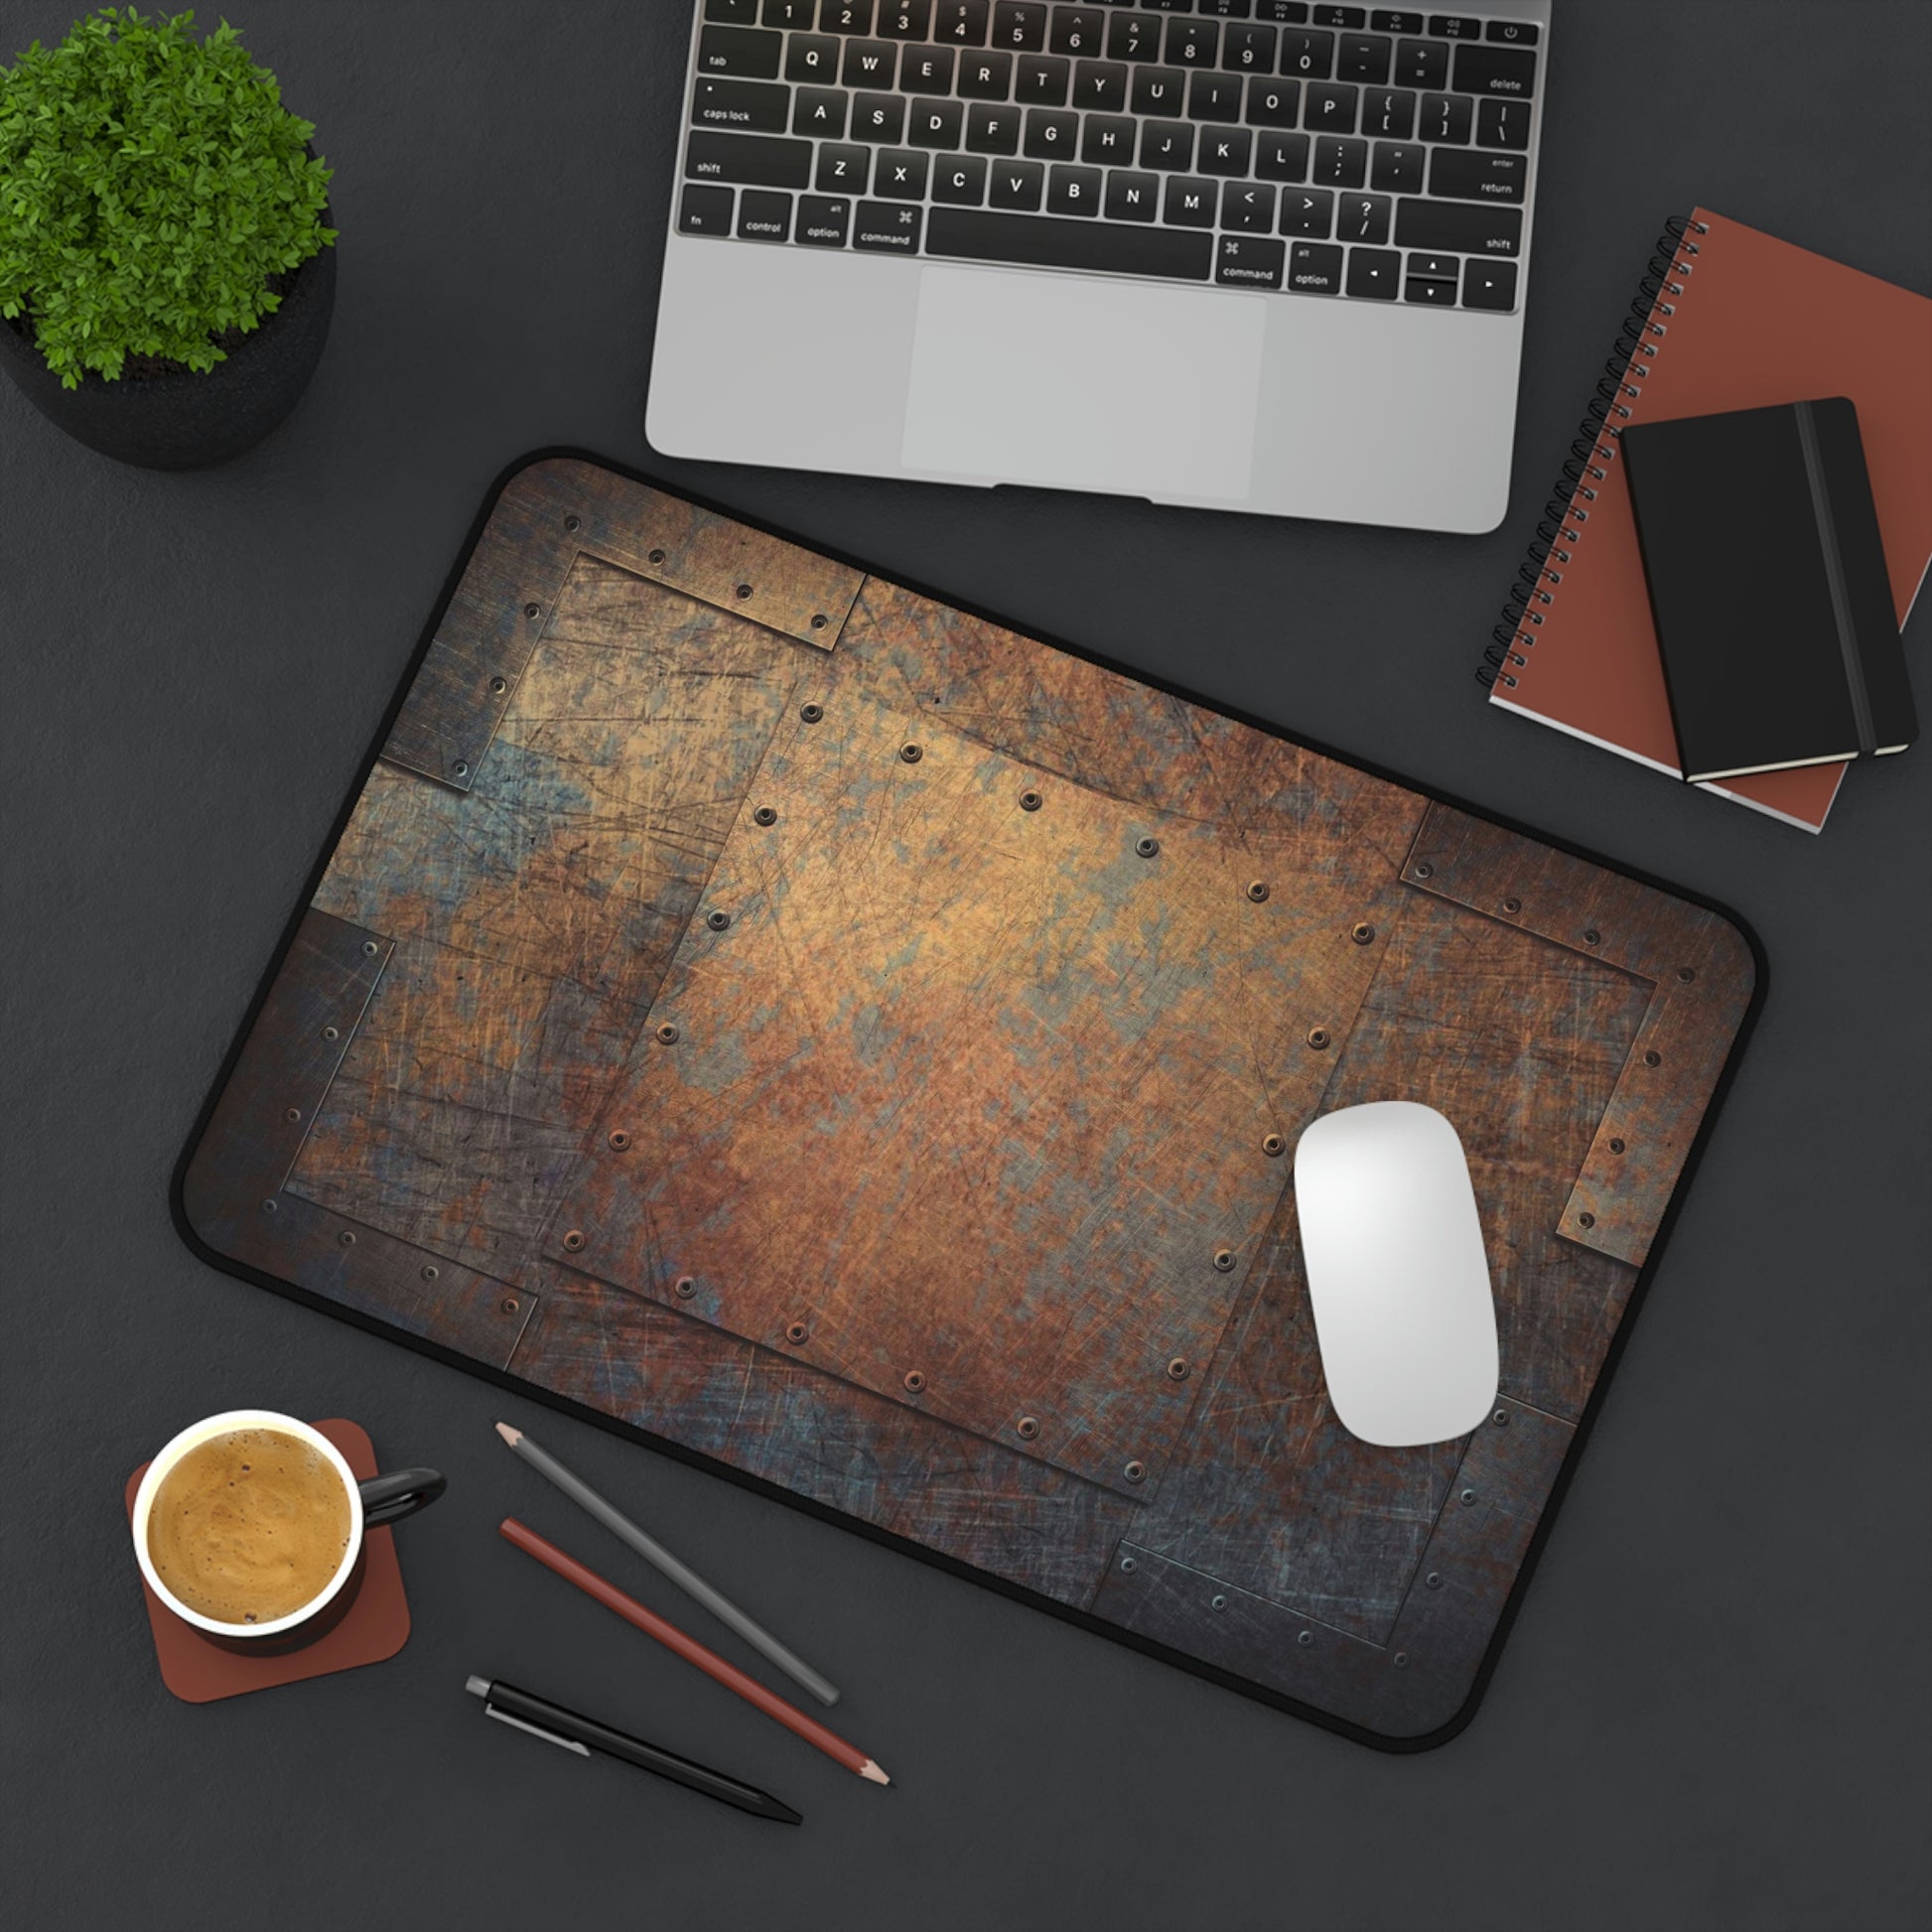 Steampunk Themed Desk Accessories - Patinated, Weather Beaten, Riveted Copper Sheets Print on Neoprene Desk Mat 12 x 18 in situ